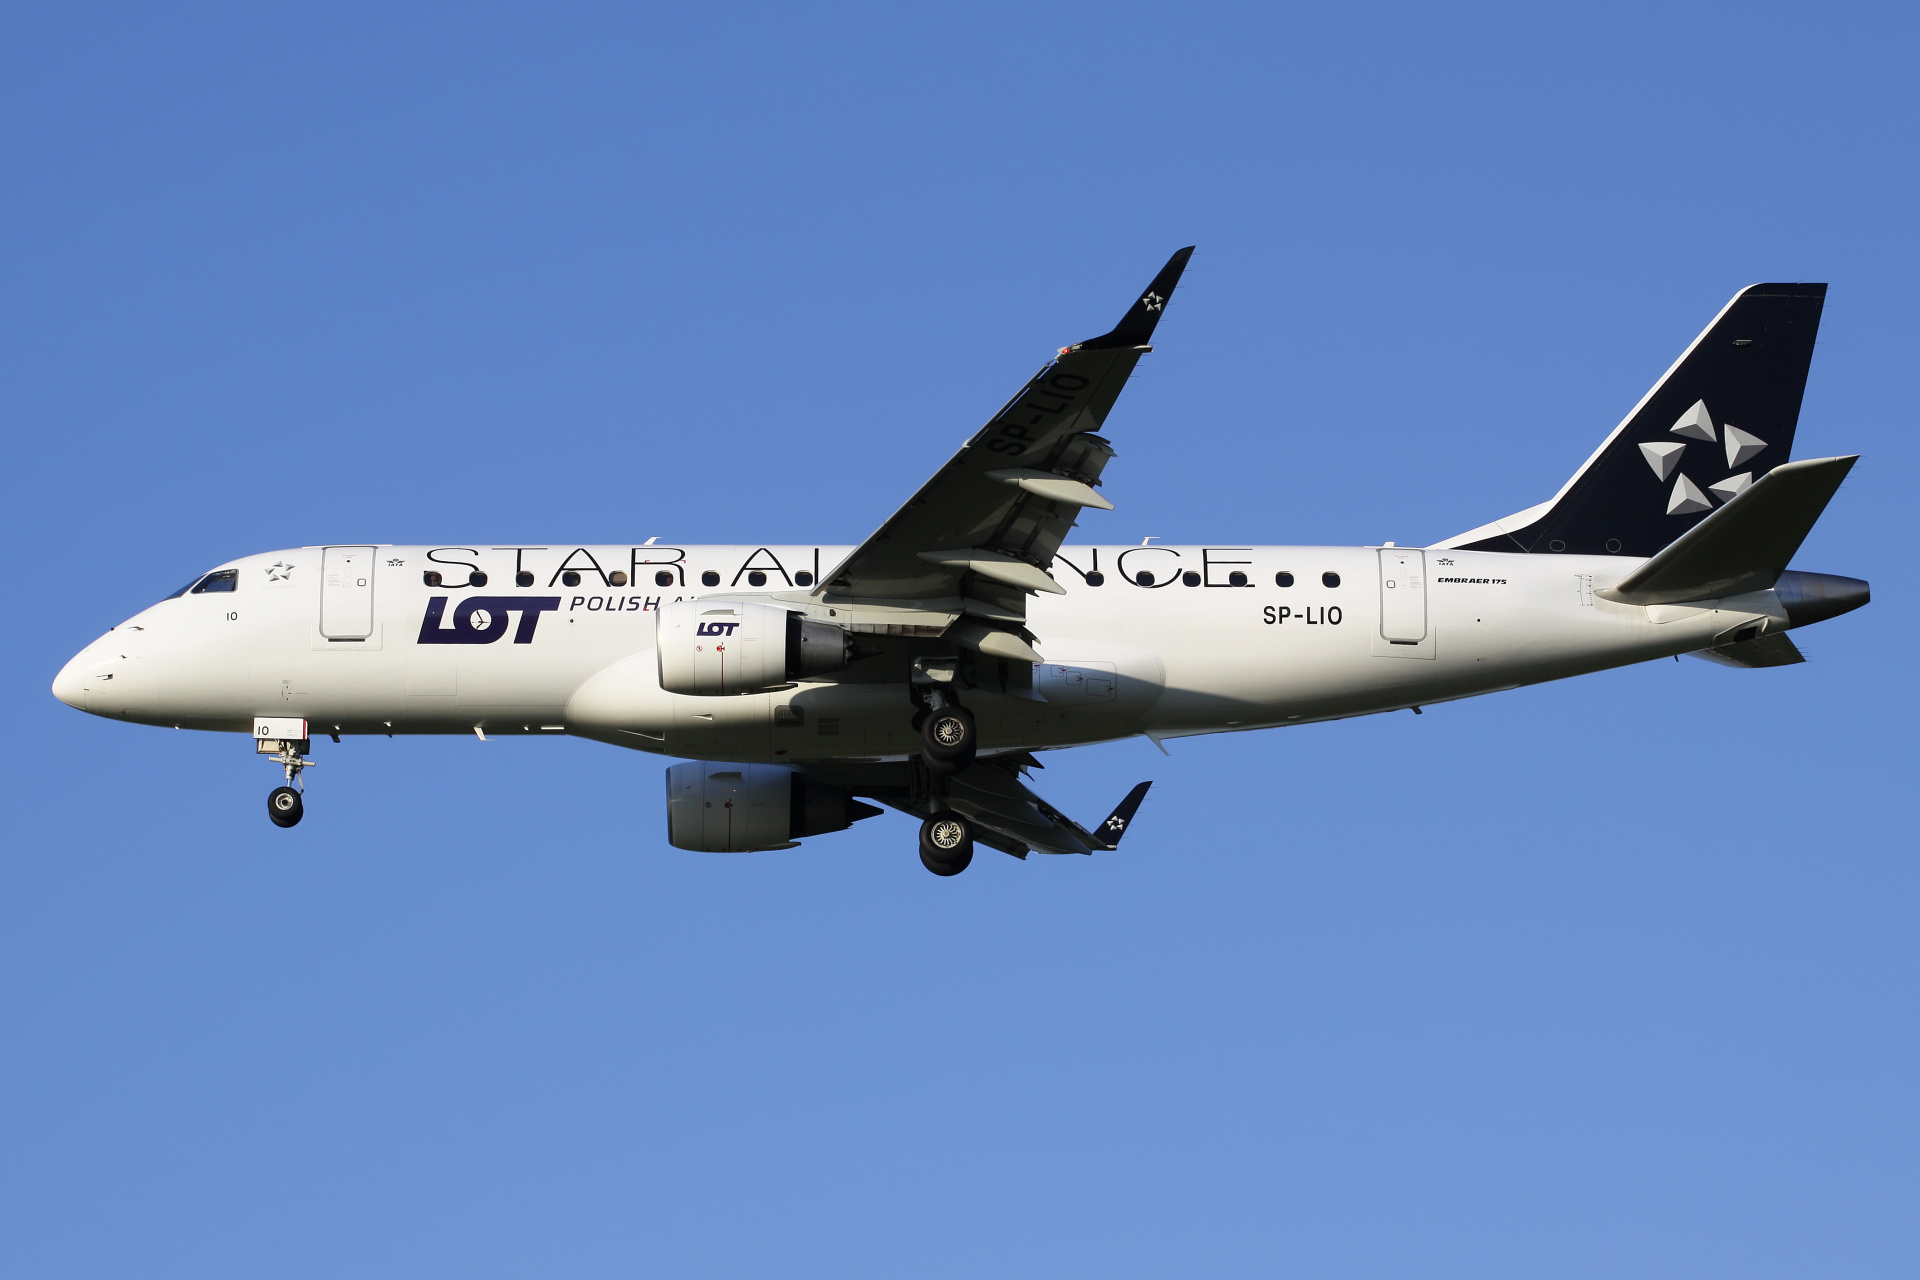 SP-LIO (Star Alliance livery) (Aircraft » EPWA Spotting » Embraer E175 » LOT Polish Airlines)